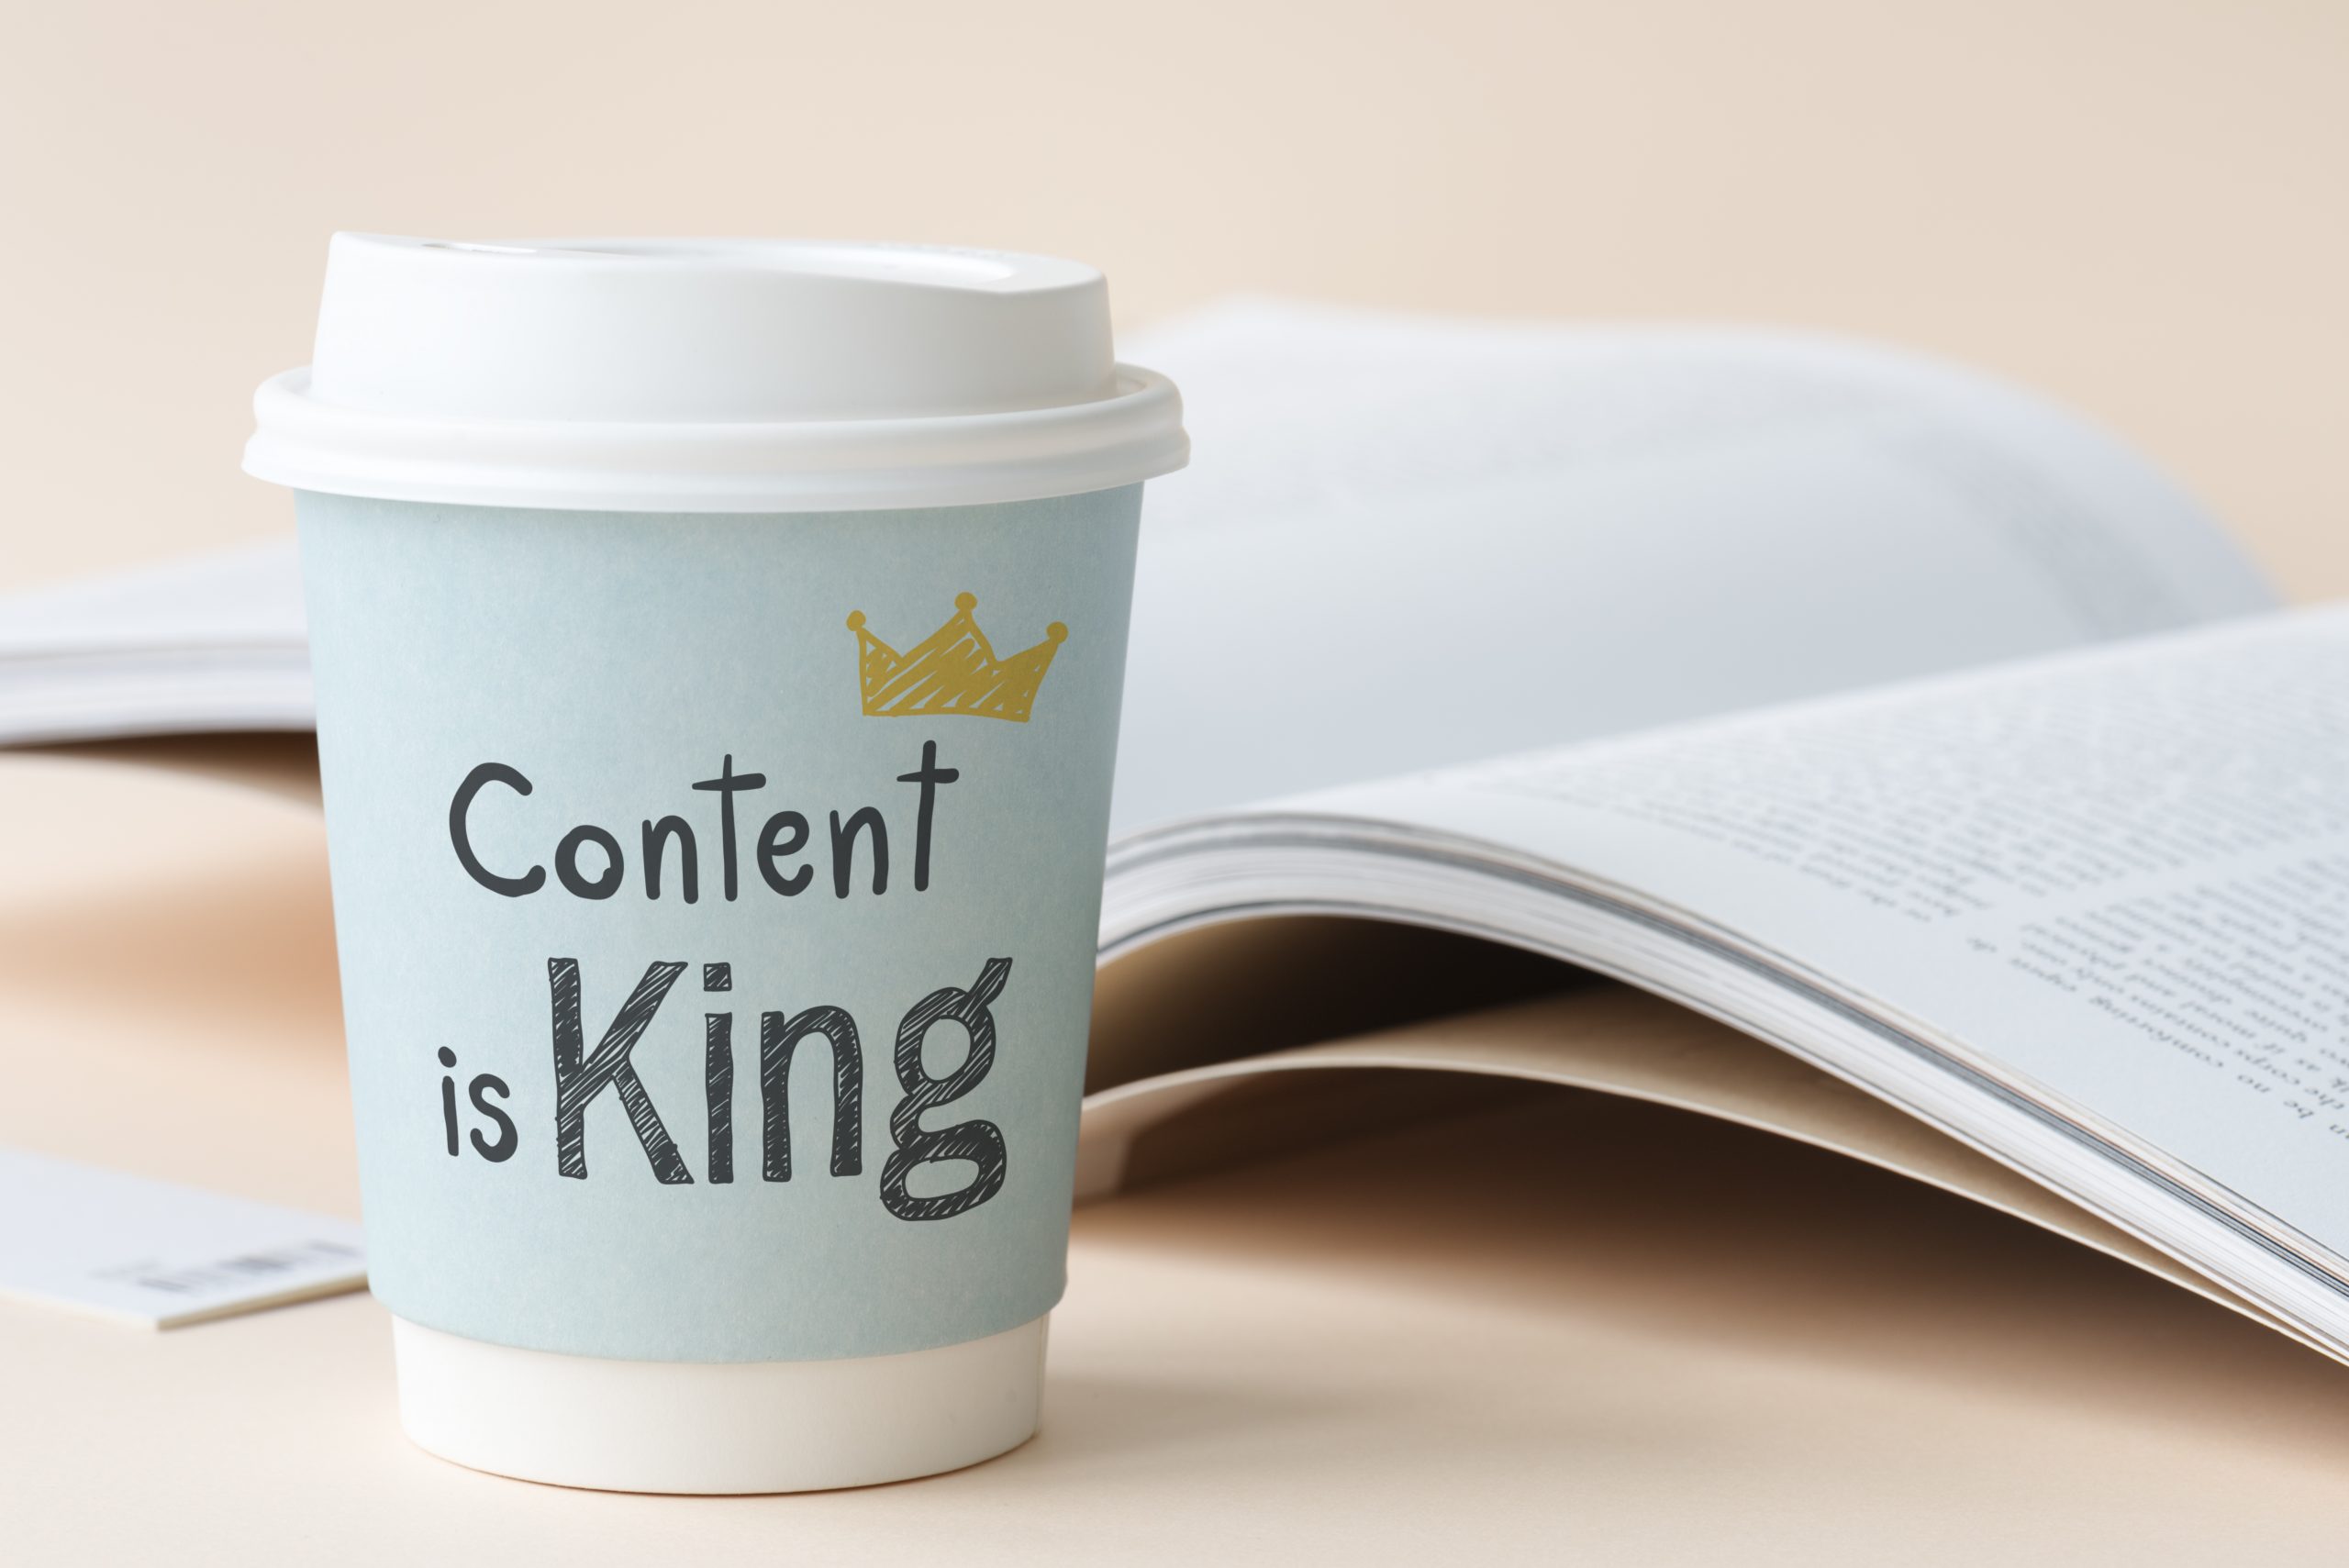 An image showing Content is King for effective seo